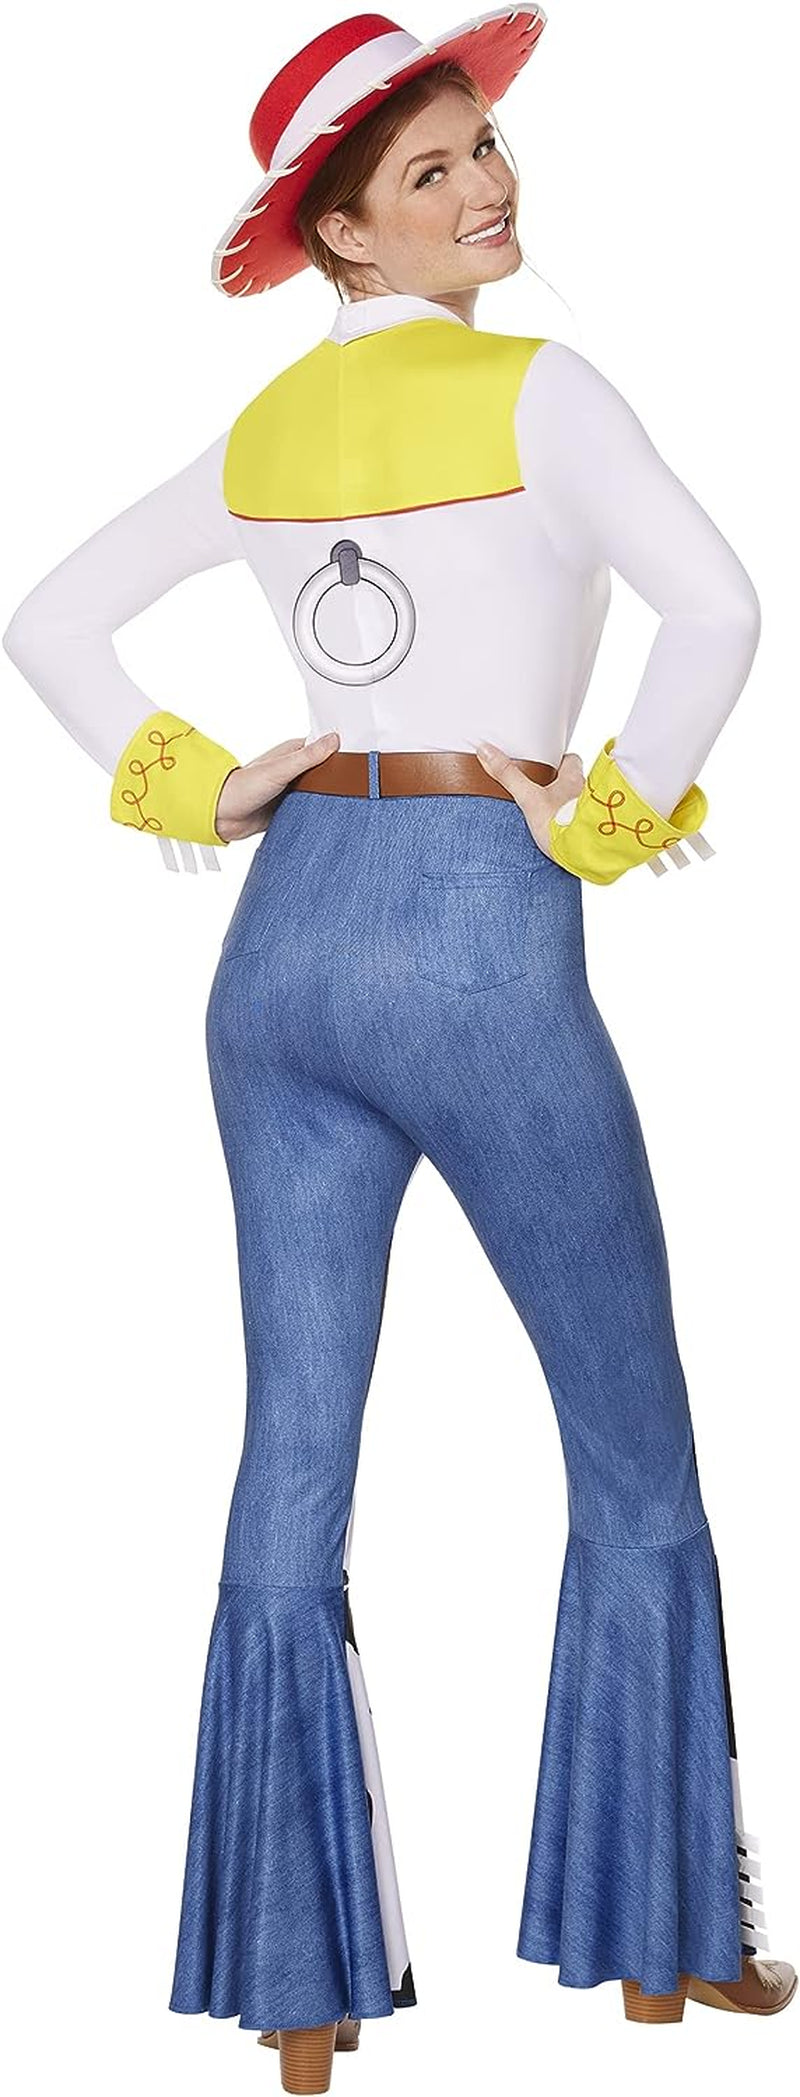 Spirit Halloween Toy Story Adult Jessie Costume | Officially Licensed | Group Costume | Pixar | Cowgirl Cosplay  Spirit Halloween   